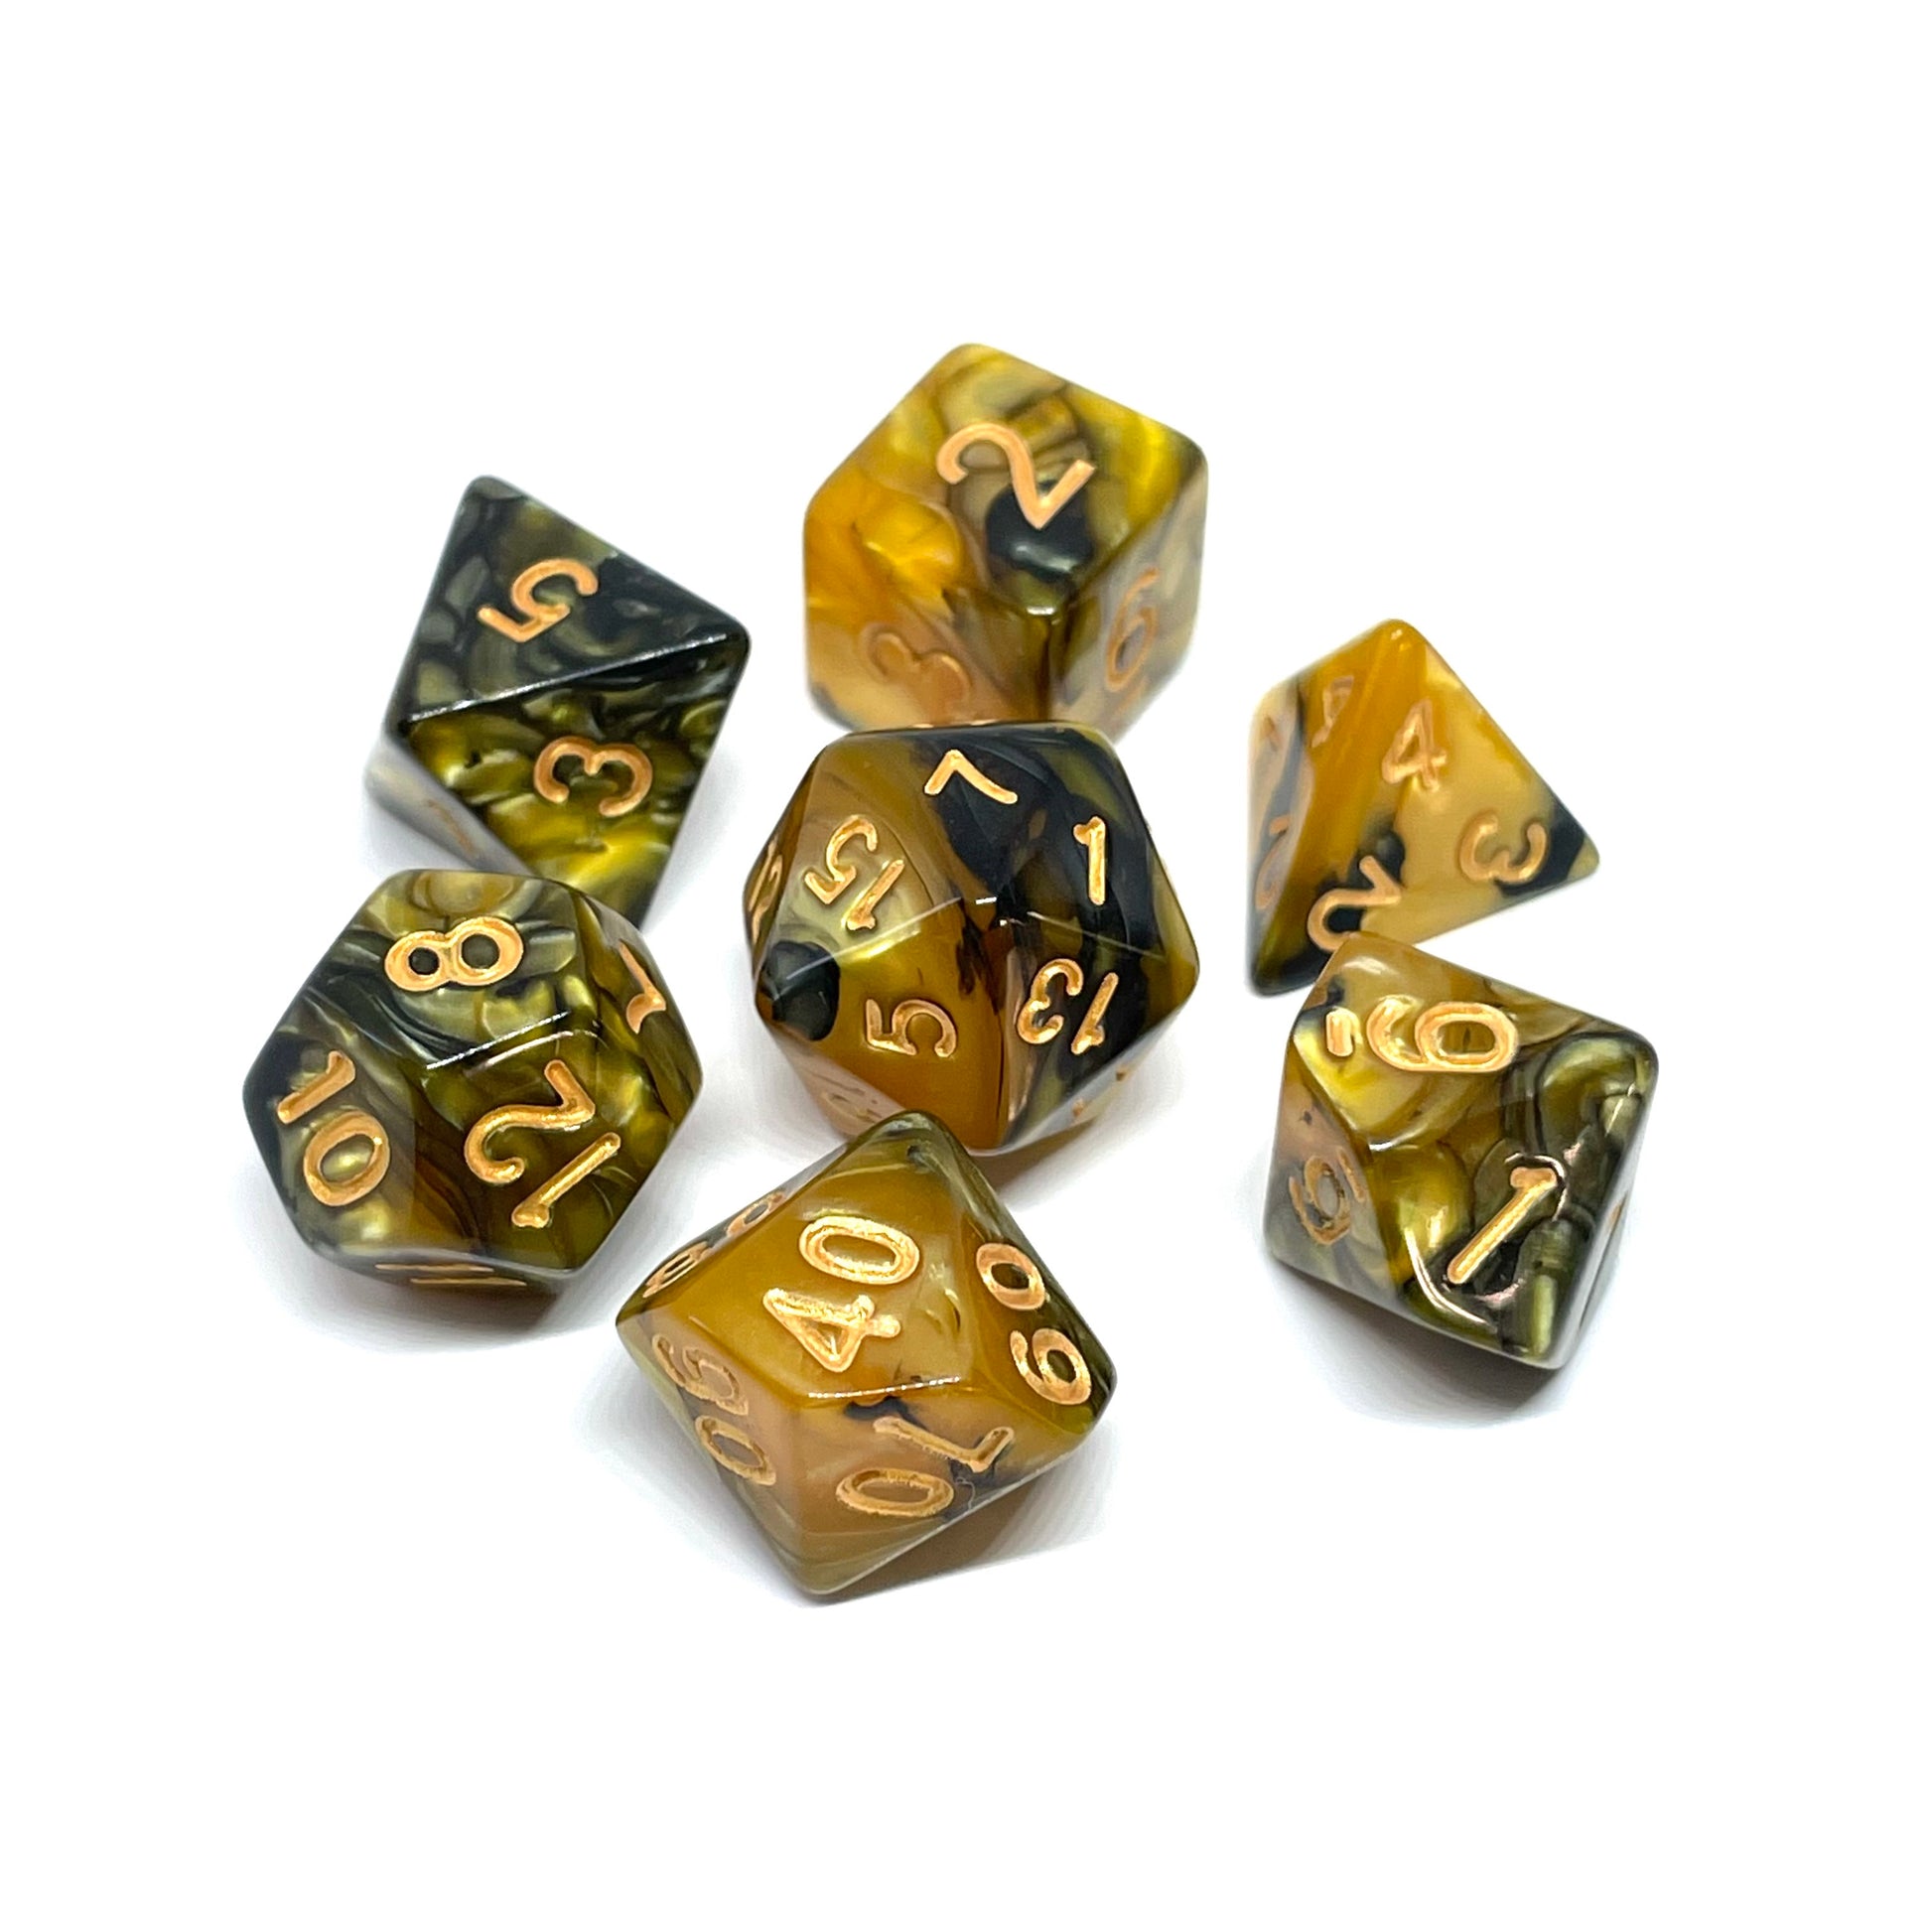 Ochre Jelly plastic dnd dice set of 7 yellow and black